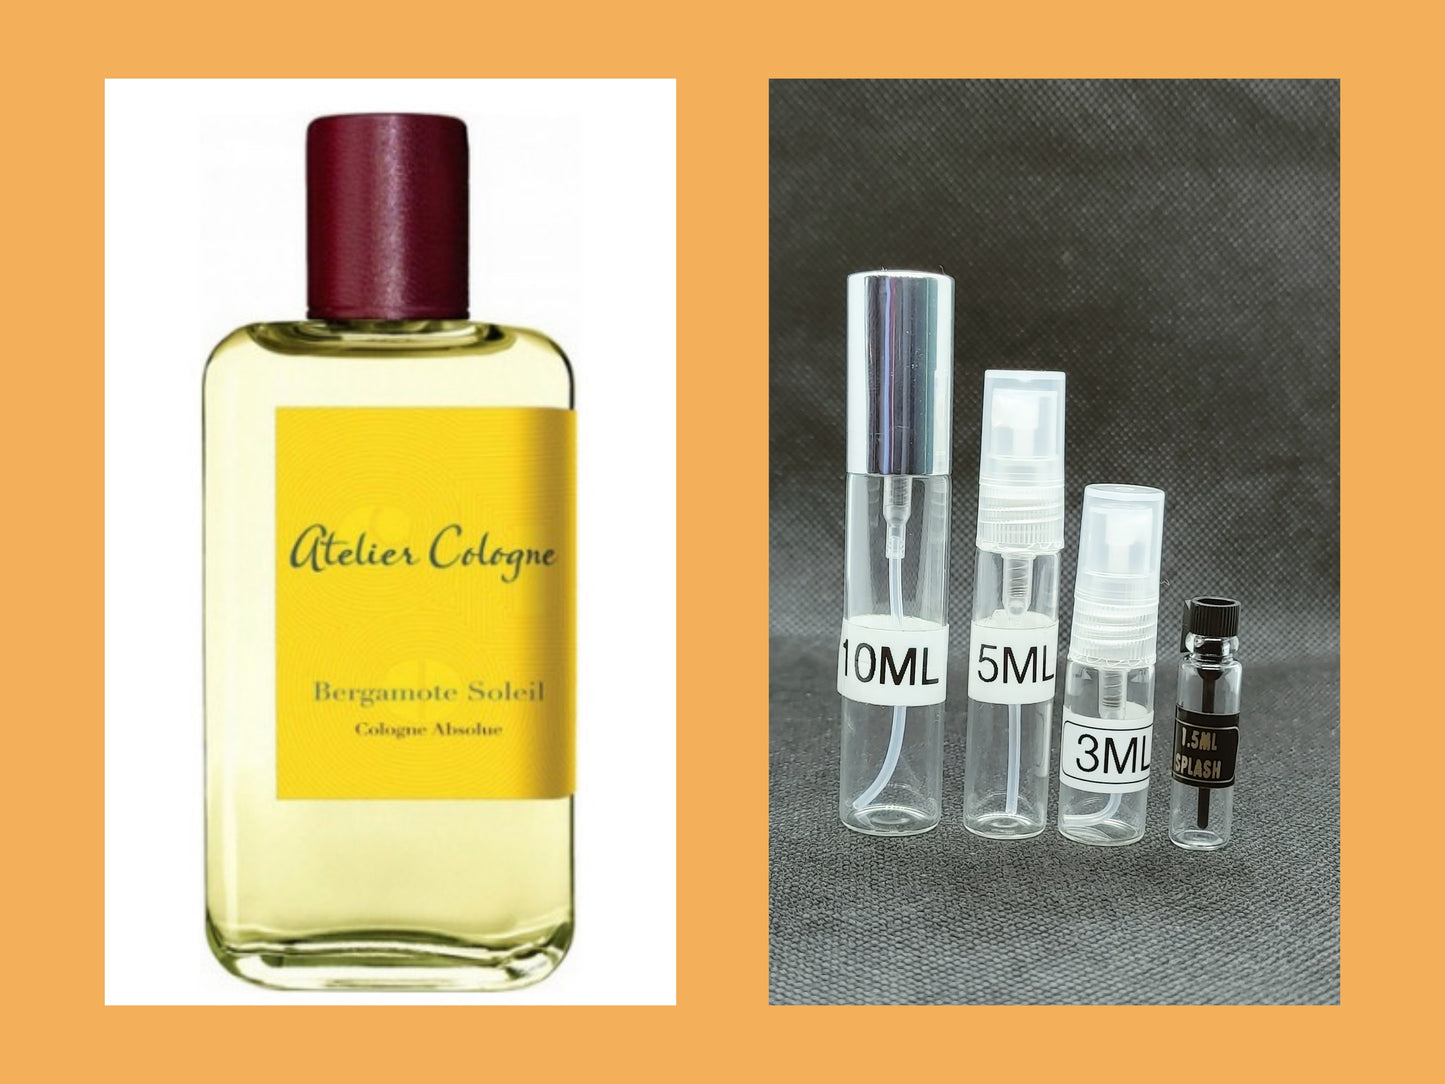 Bergamote Soleil Atelier Cologne for women and men Decants